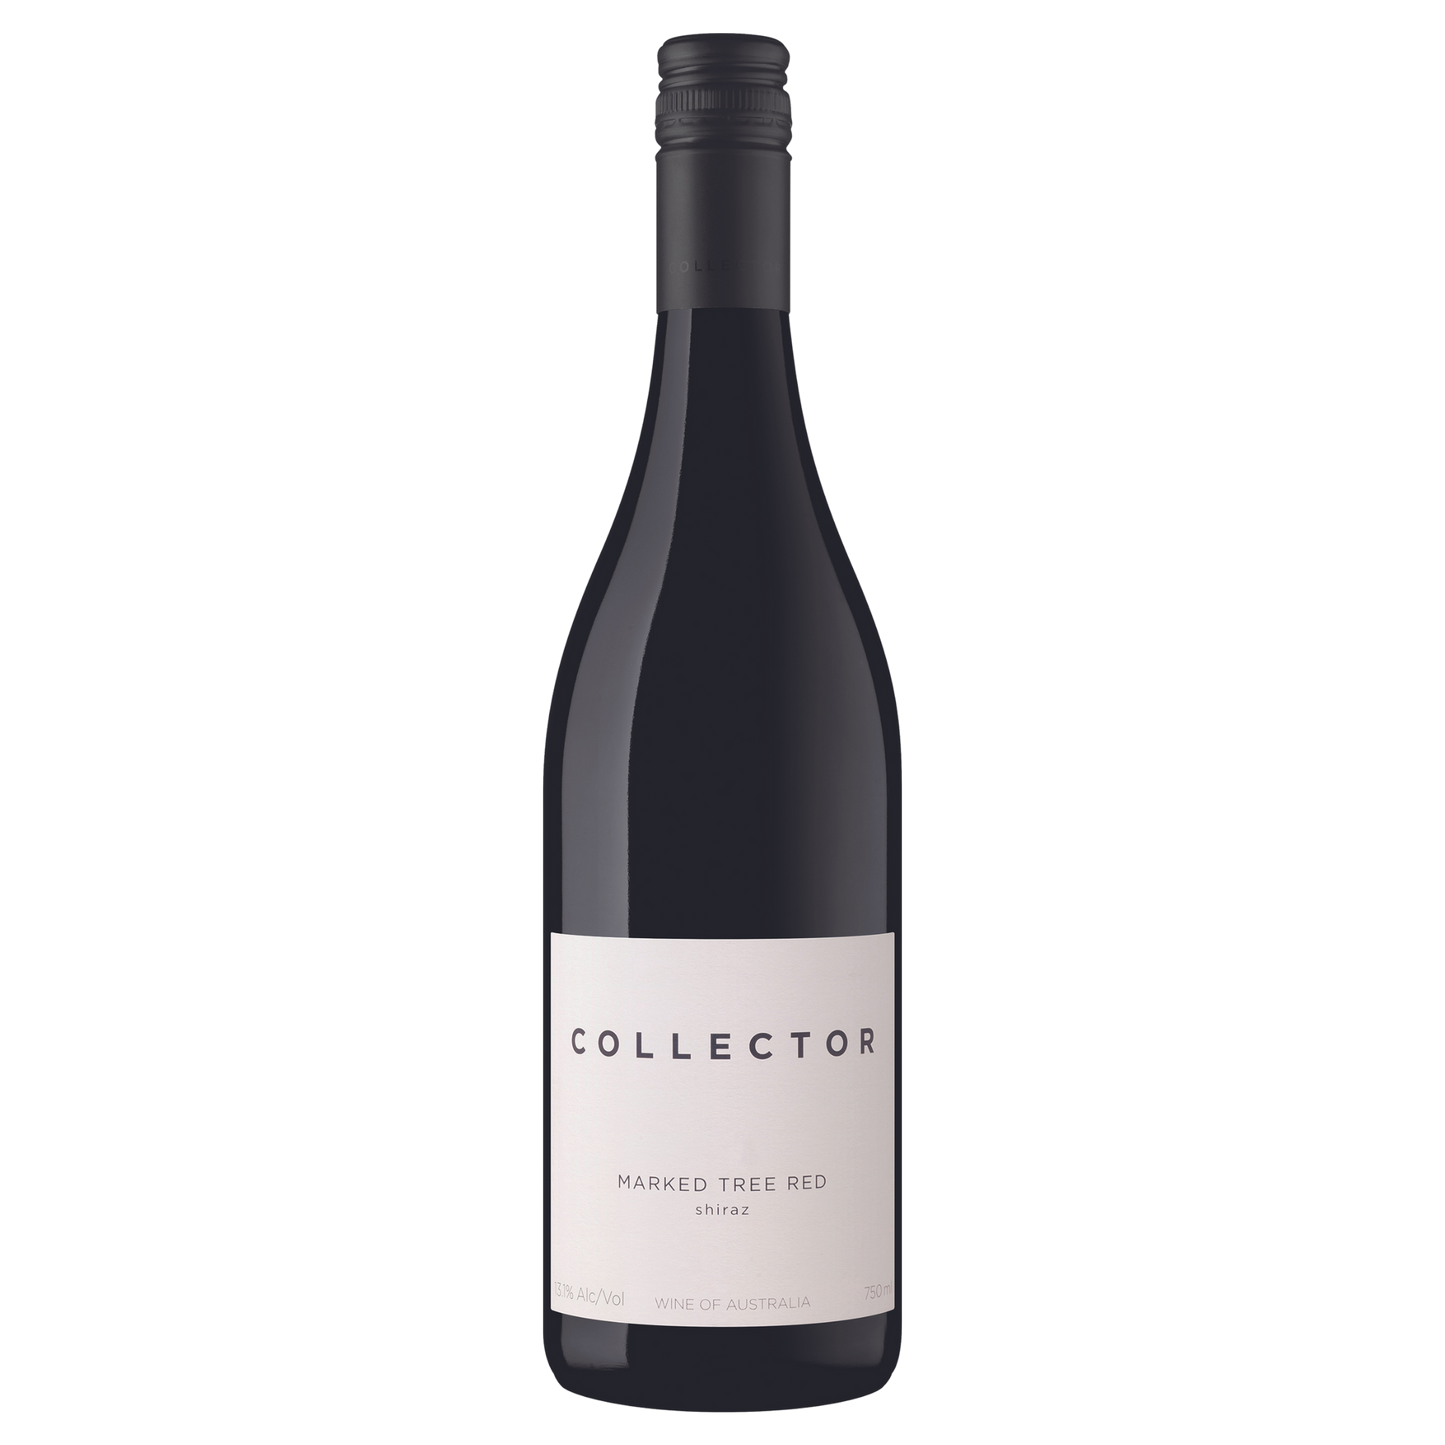 Collector Marked Tree Red Shiraz 2019